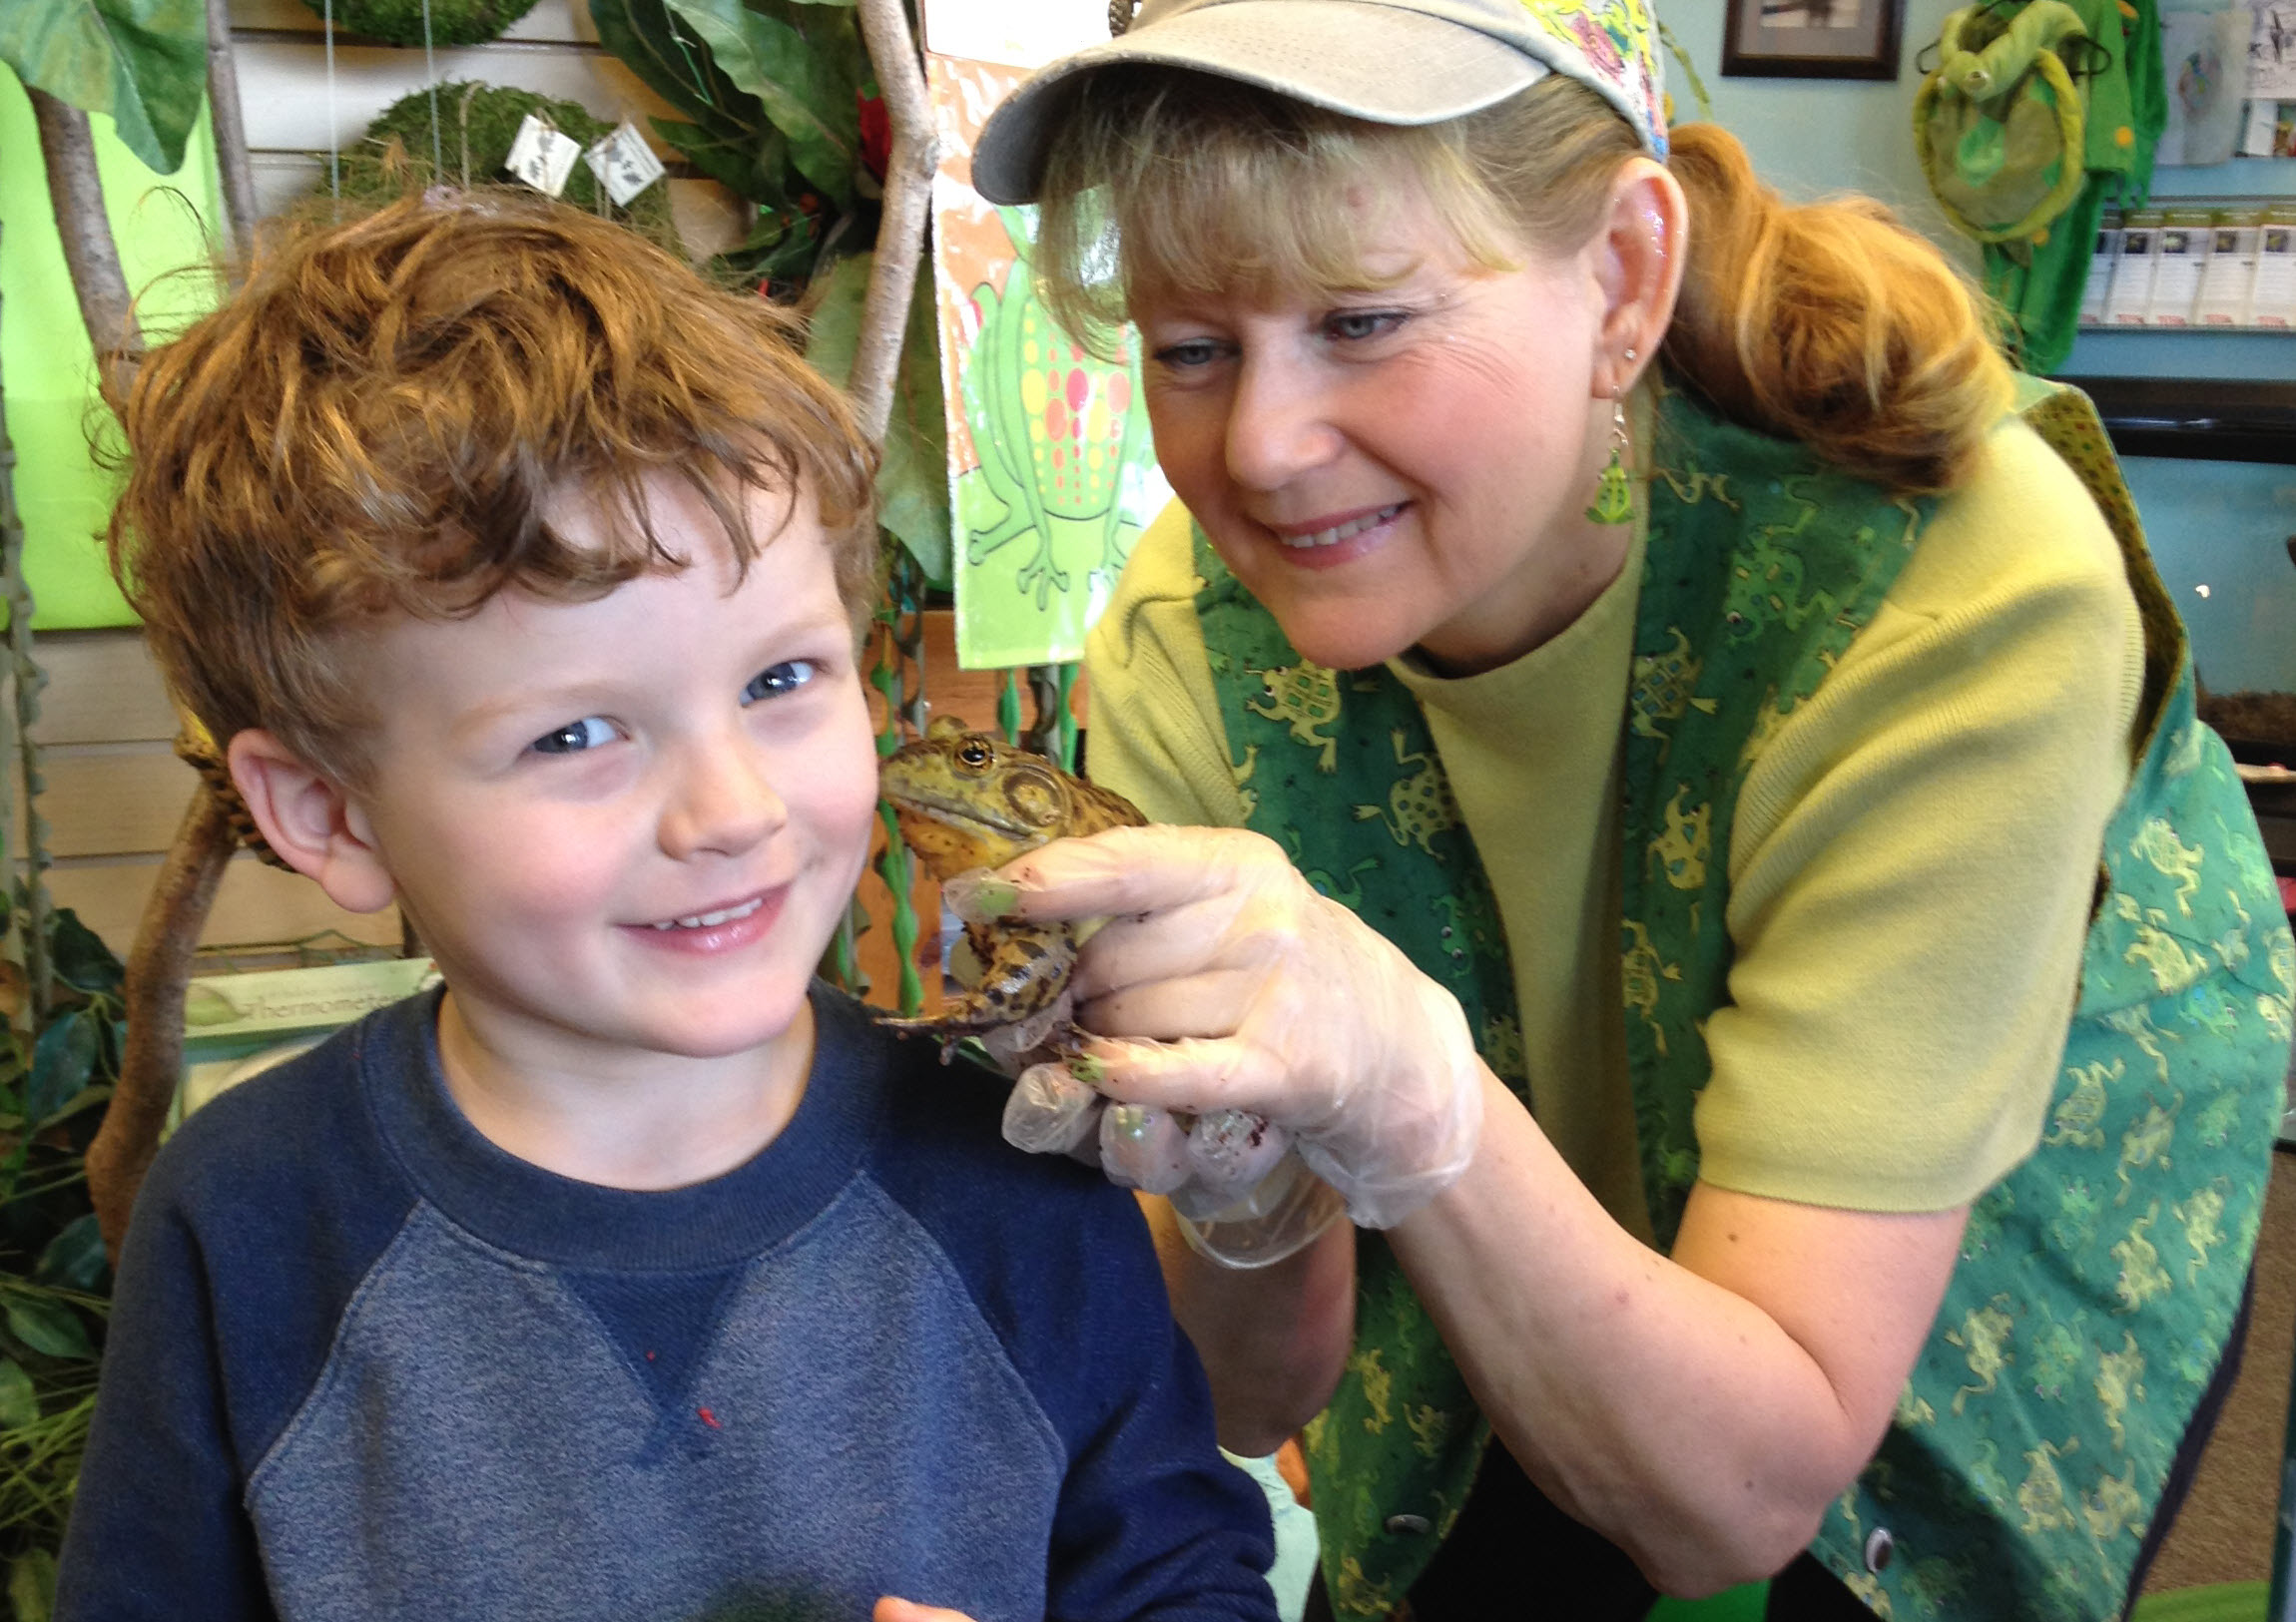 The Frog Lady and one of her bullfrog greets a 5-year-old boy